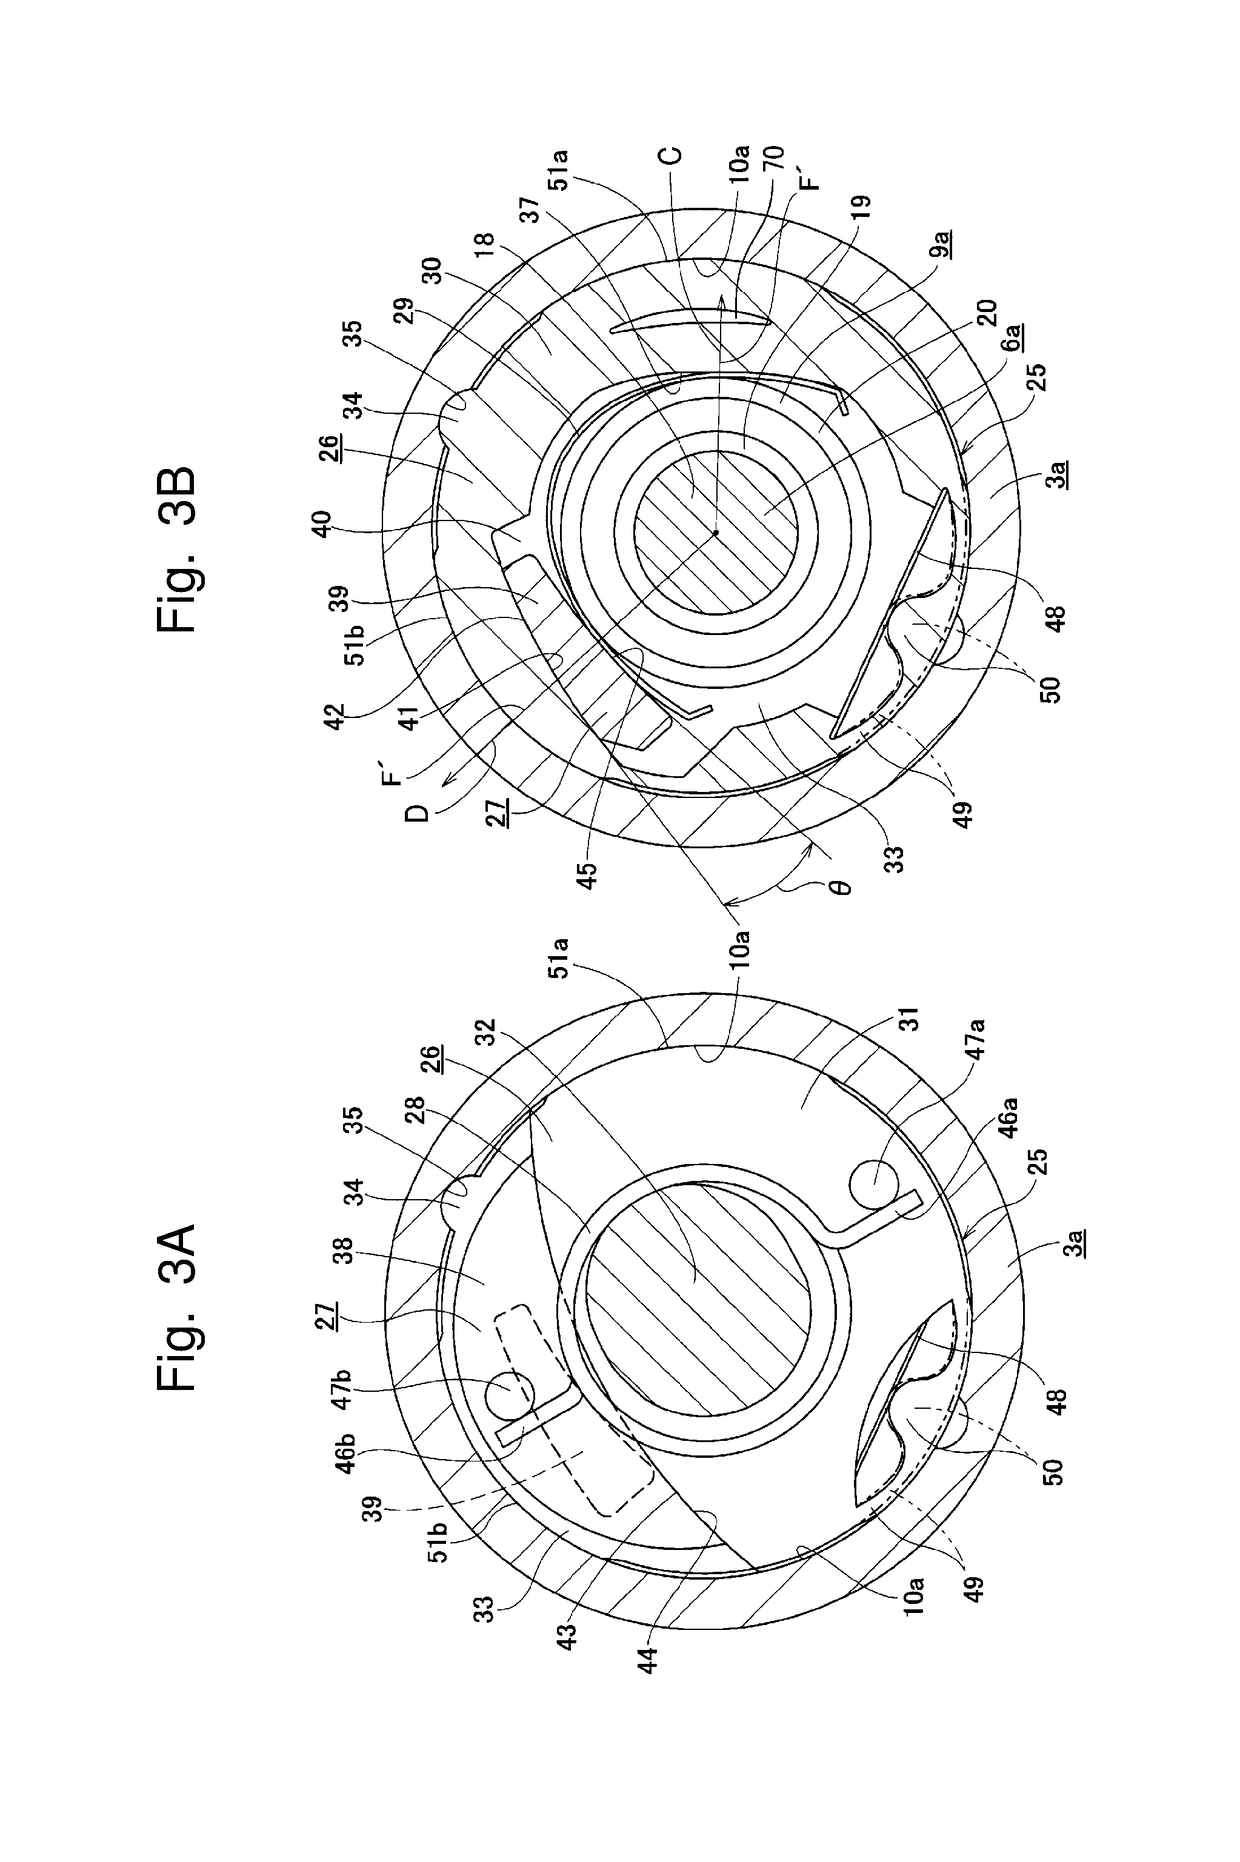 Electrically driven power steering device